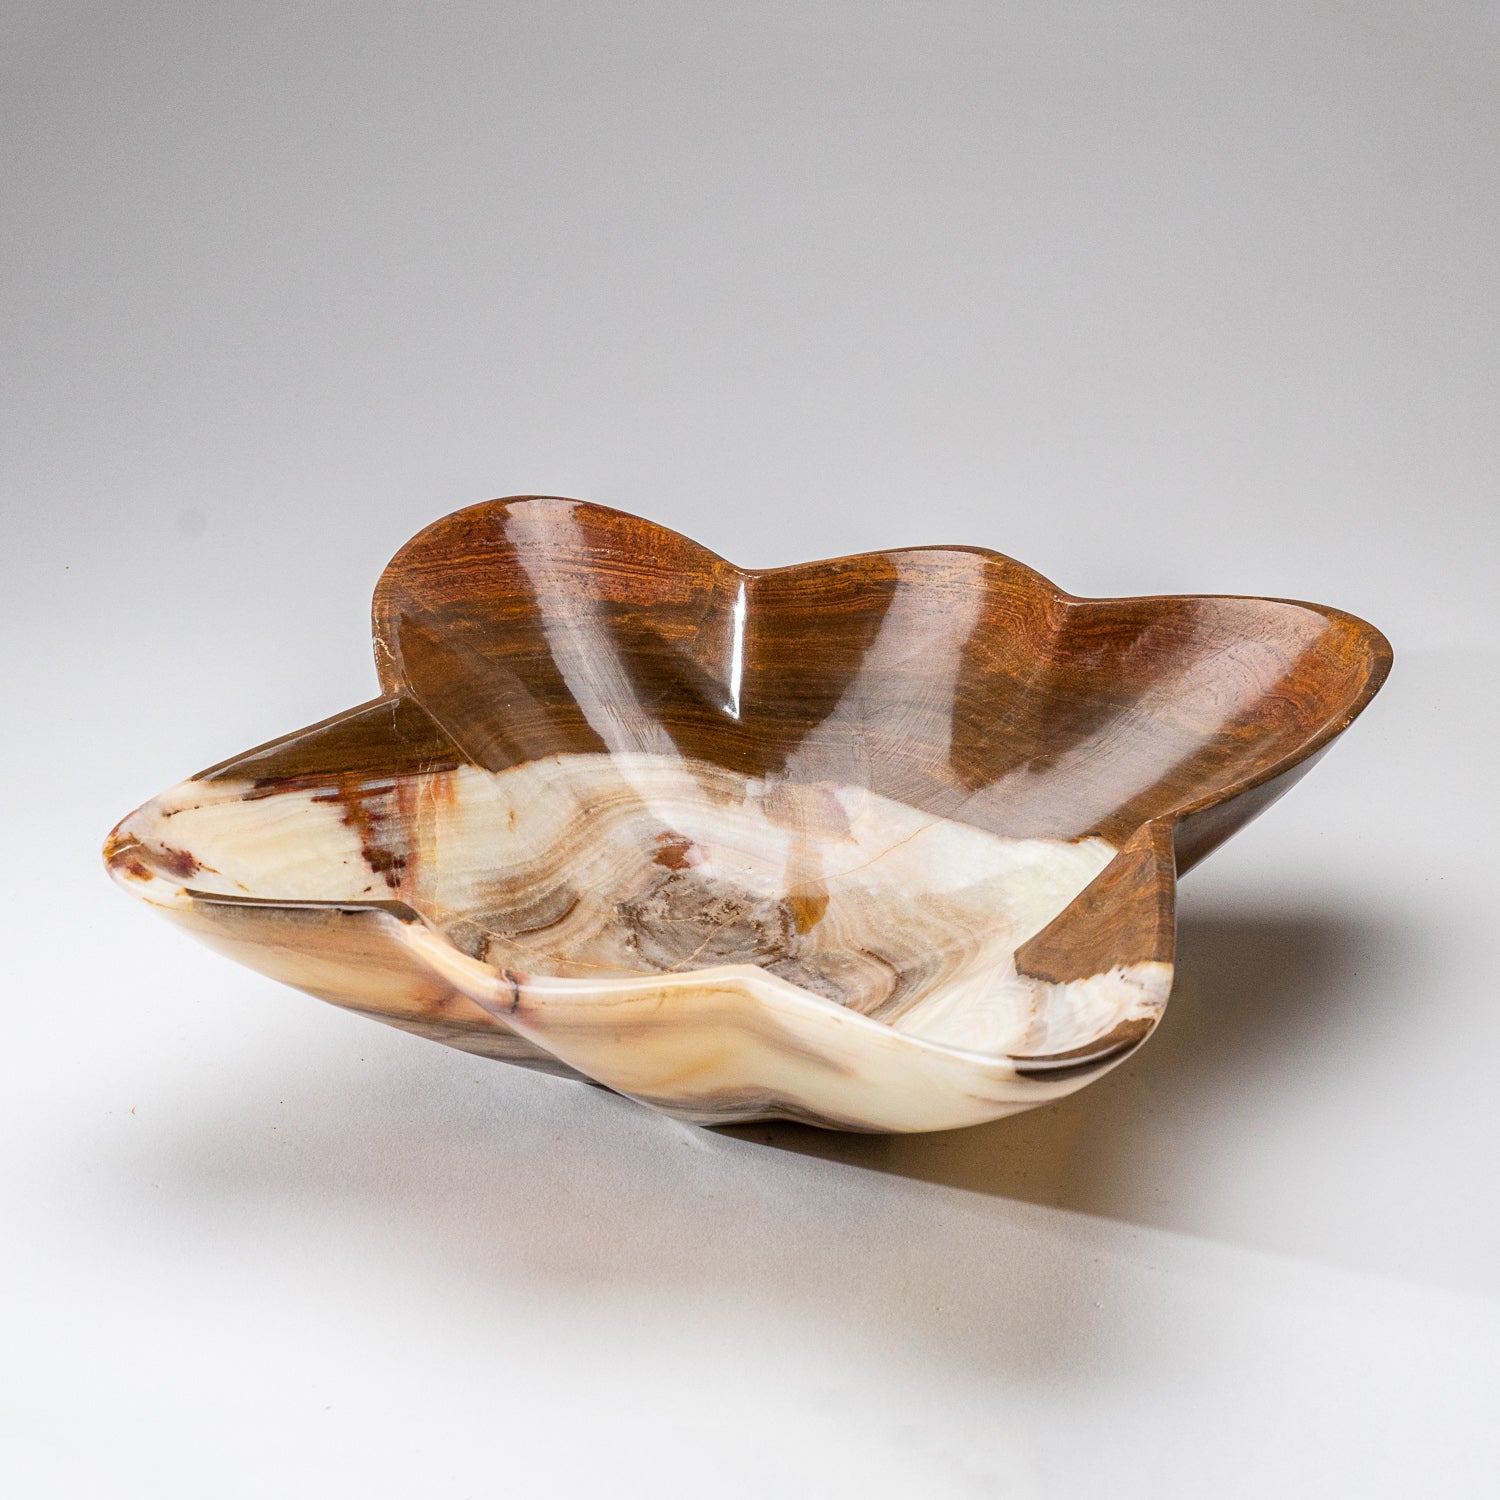 Genuine Polished Brown and White Onyx Bowl from Pakistan (7.4 lbs)